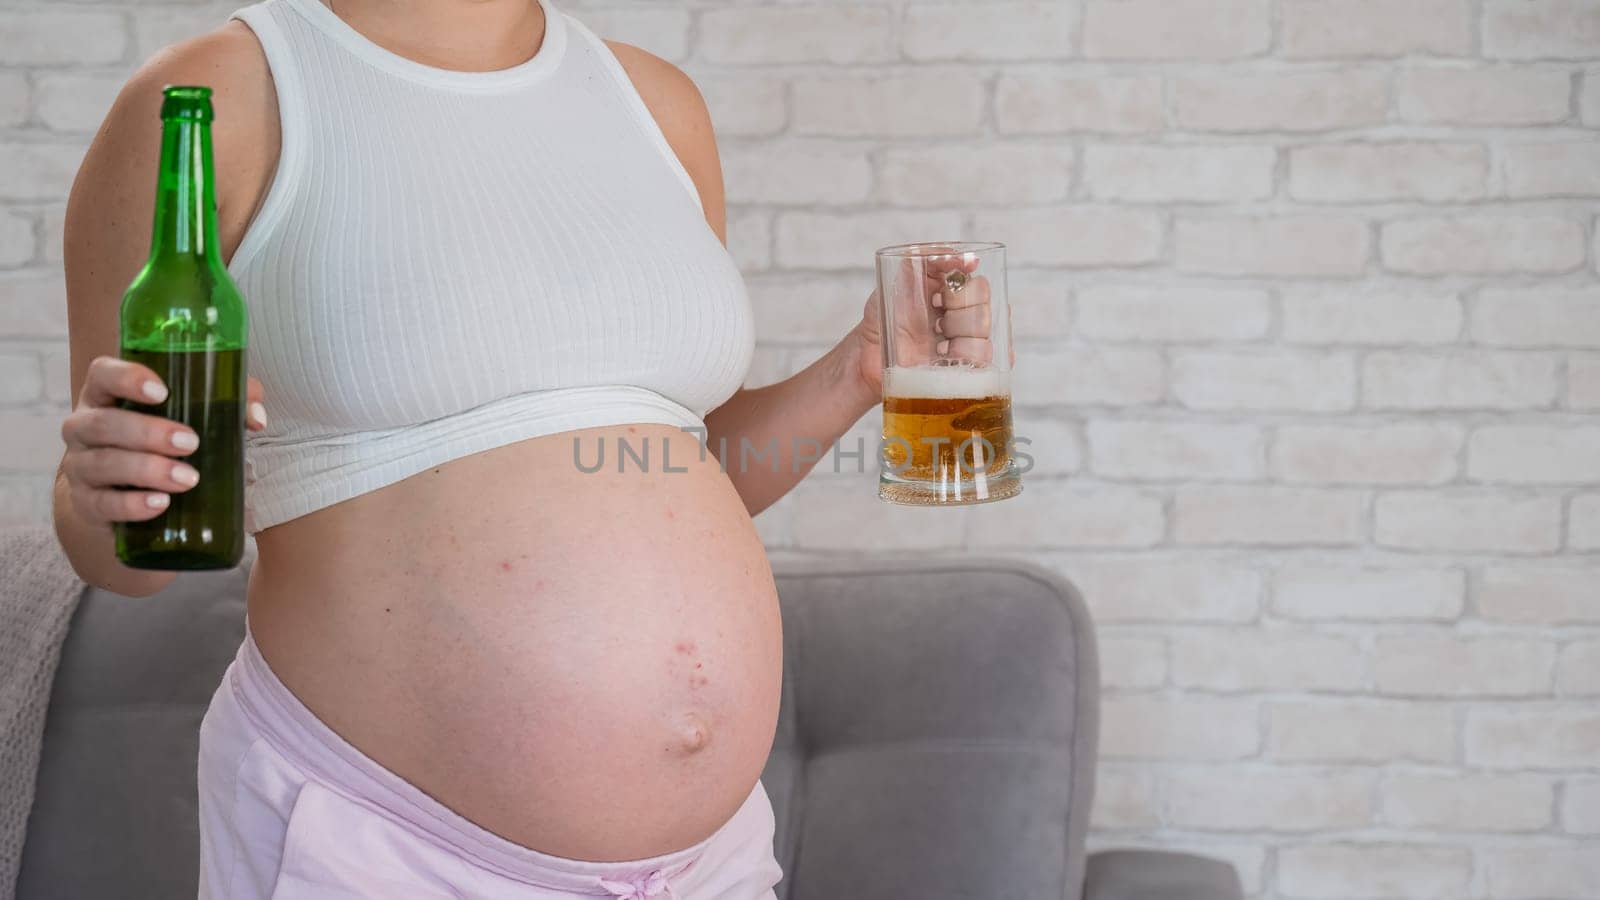 Pregnant woman holding glass and bottle of beer. by mrwed54